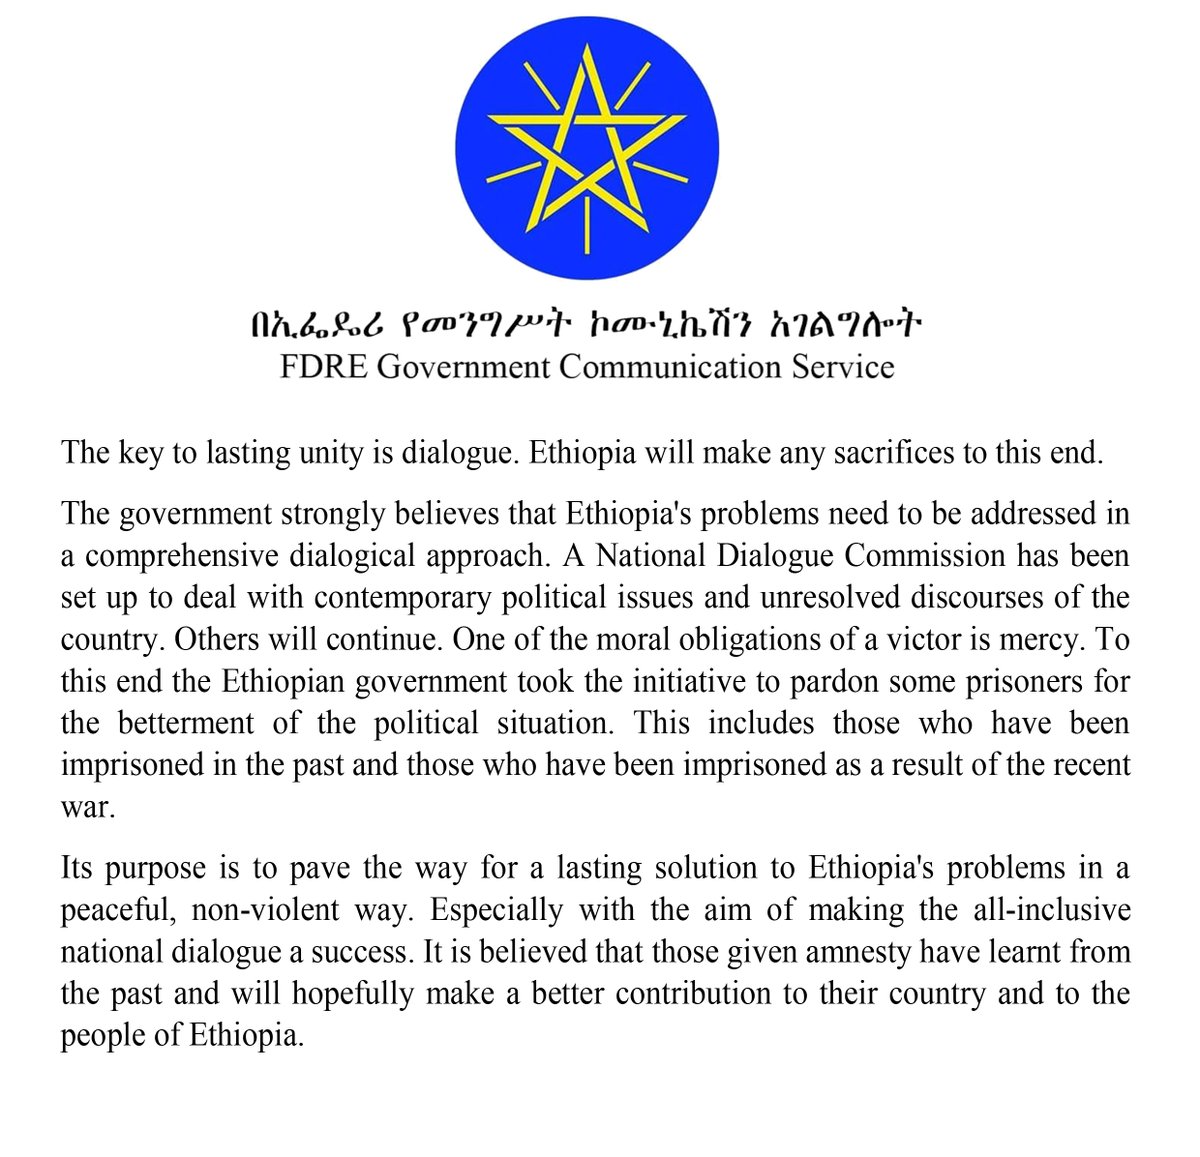 Dialogue is the bridge between conflict and resolution, Ethiopia's government is dedicated to building sturdy bridges for lasting peace. #Ethiopia_prevails #HandOffEthiopia @USEmbassyAddis @UNHumanRights @UNOCHA @UN @UNDP @UNHCREthiopia @MikeHammerUSA